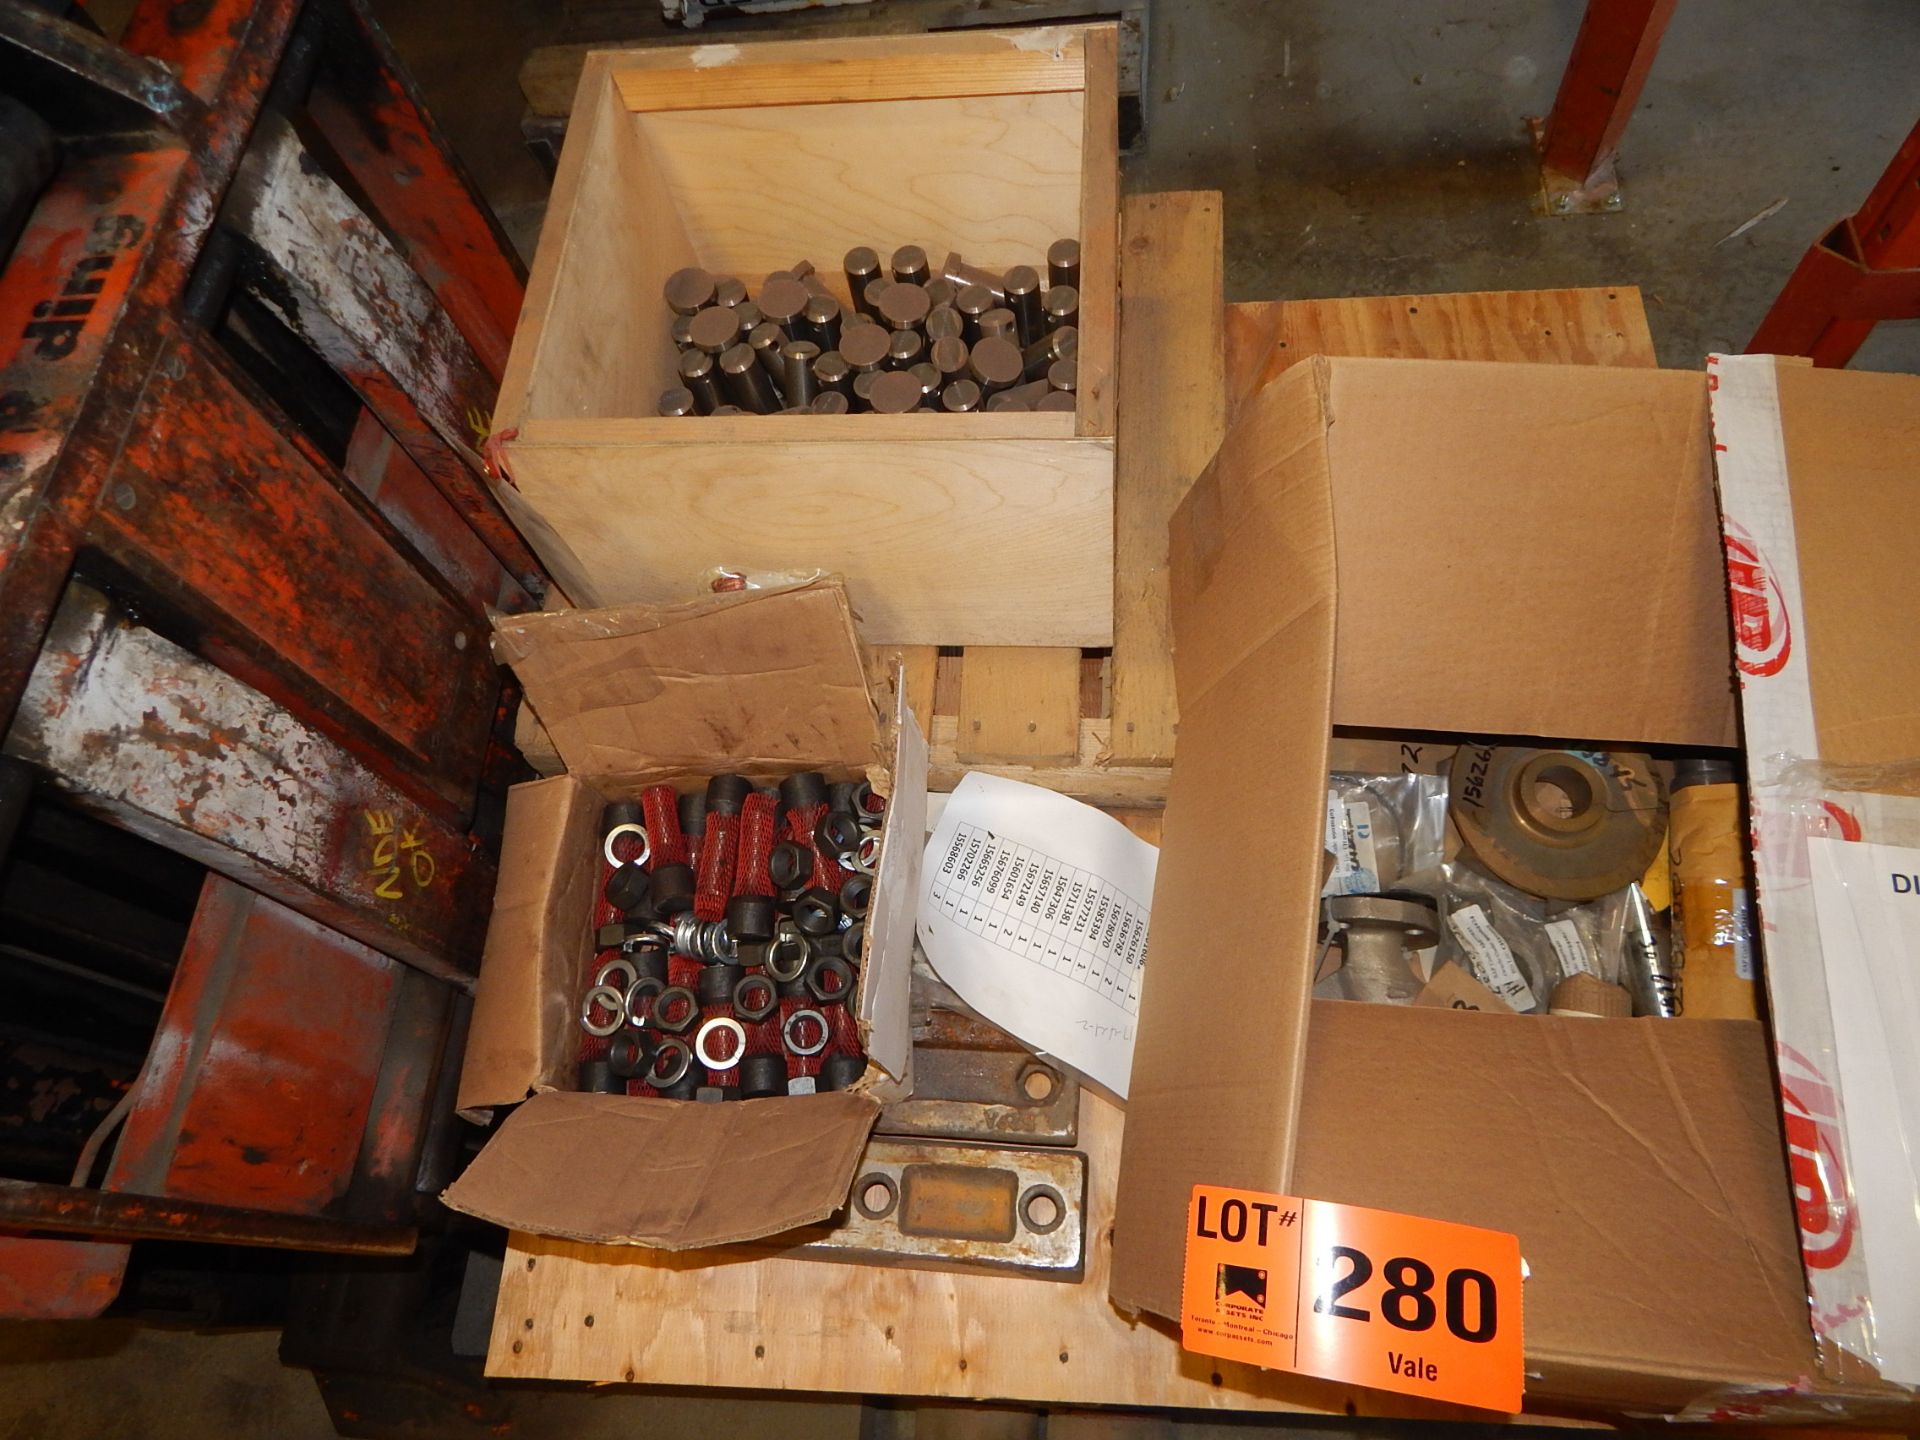 LOT/ CONTENTS OF SKID CONSISTING OF PUMP IMPELLERS, PUMP COUPLING SHAFTS,PUMP CASINGS (LOCATED AT